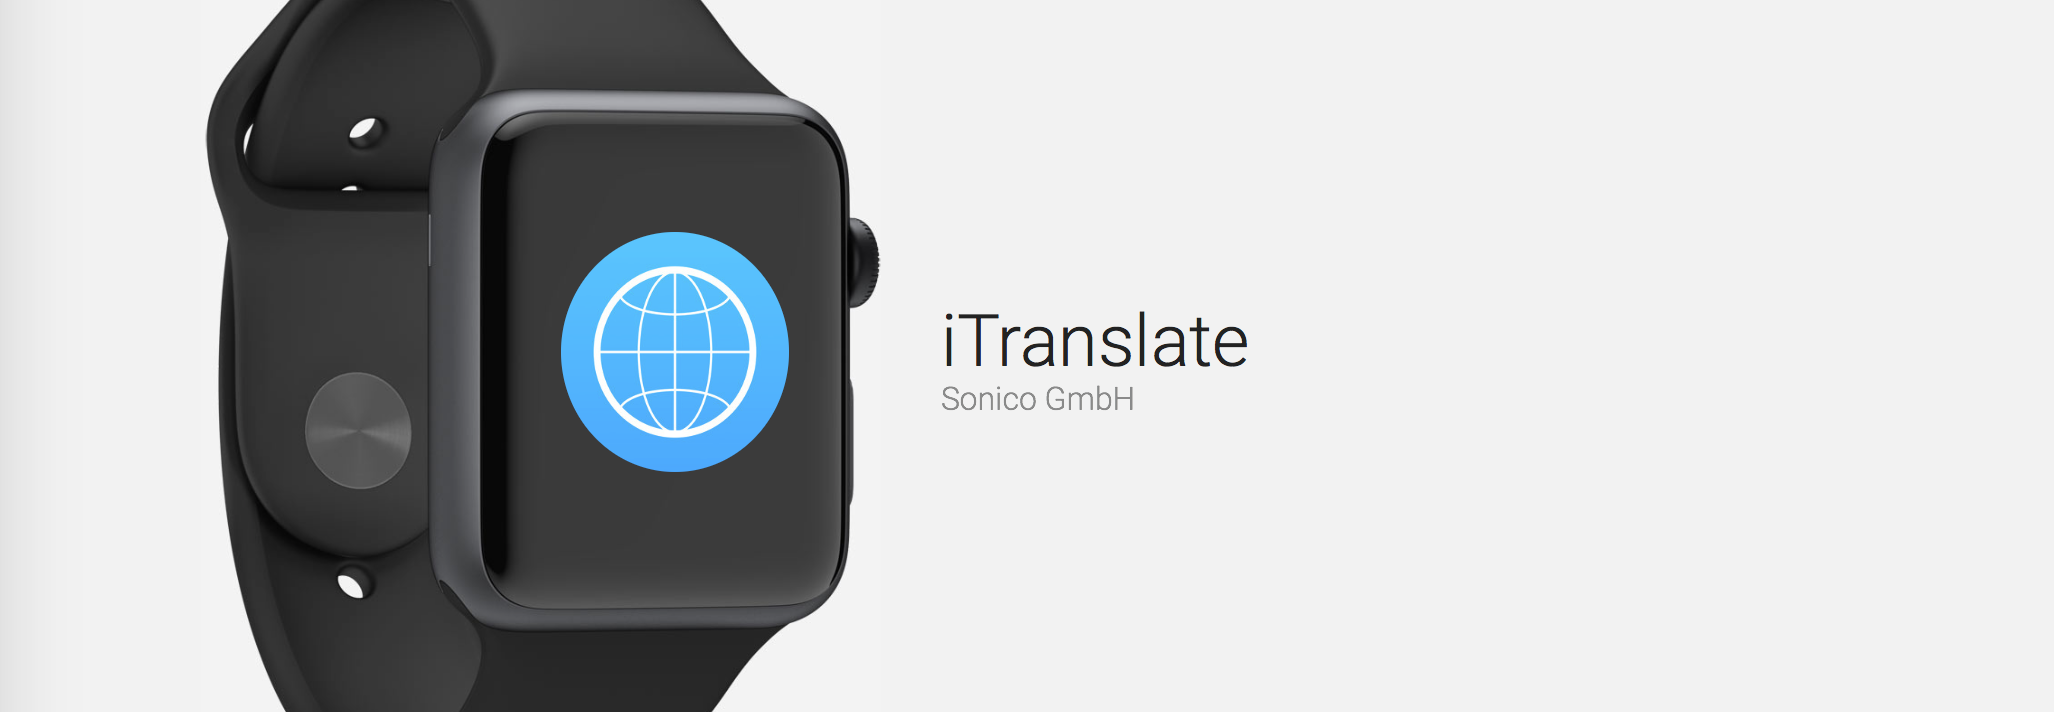 Get smart translations at your wrist with iTranslate's support for Time Travel